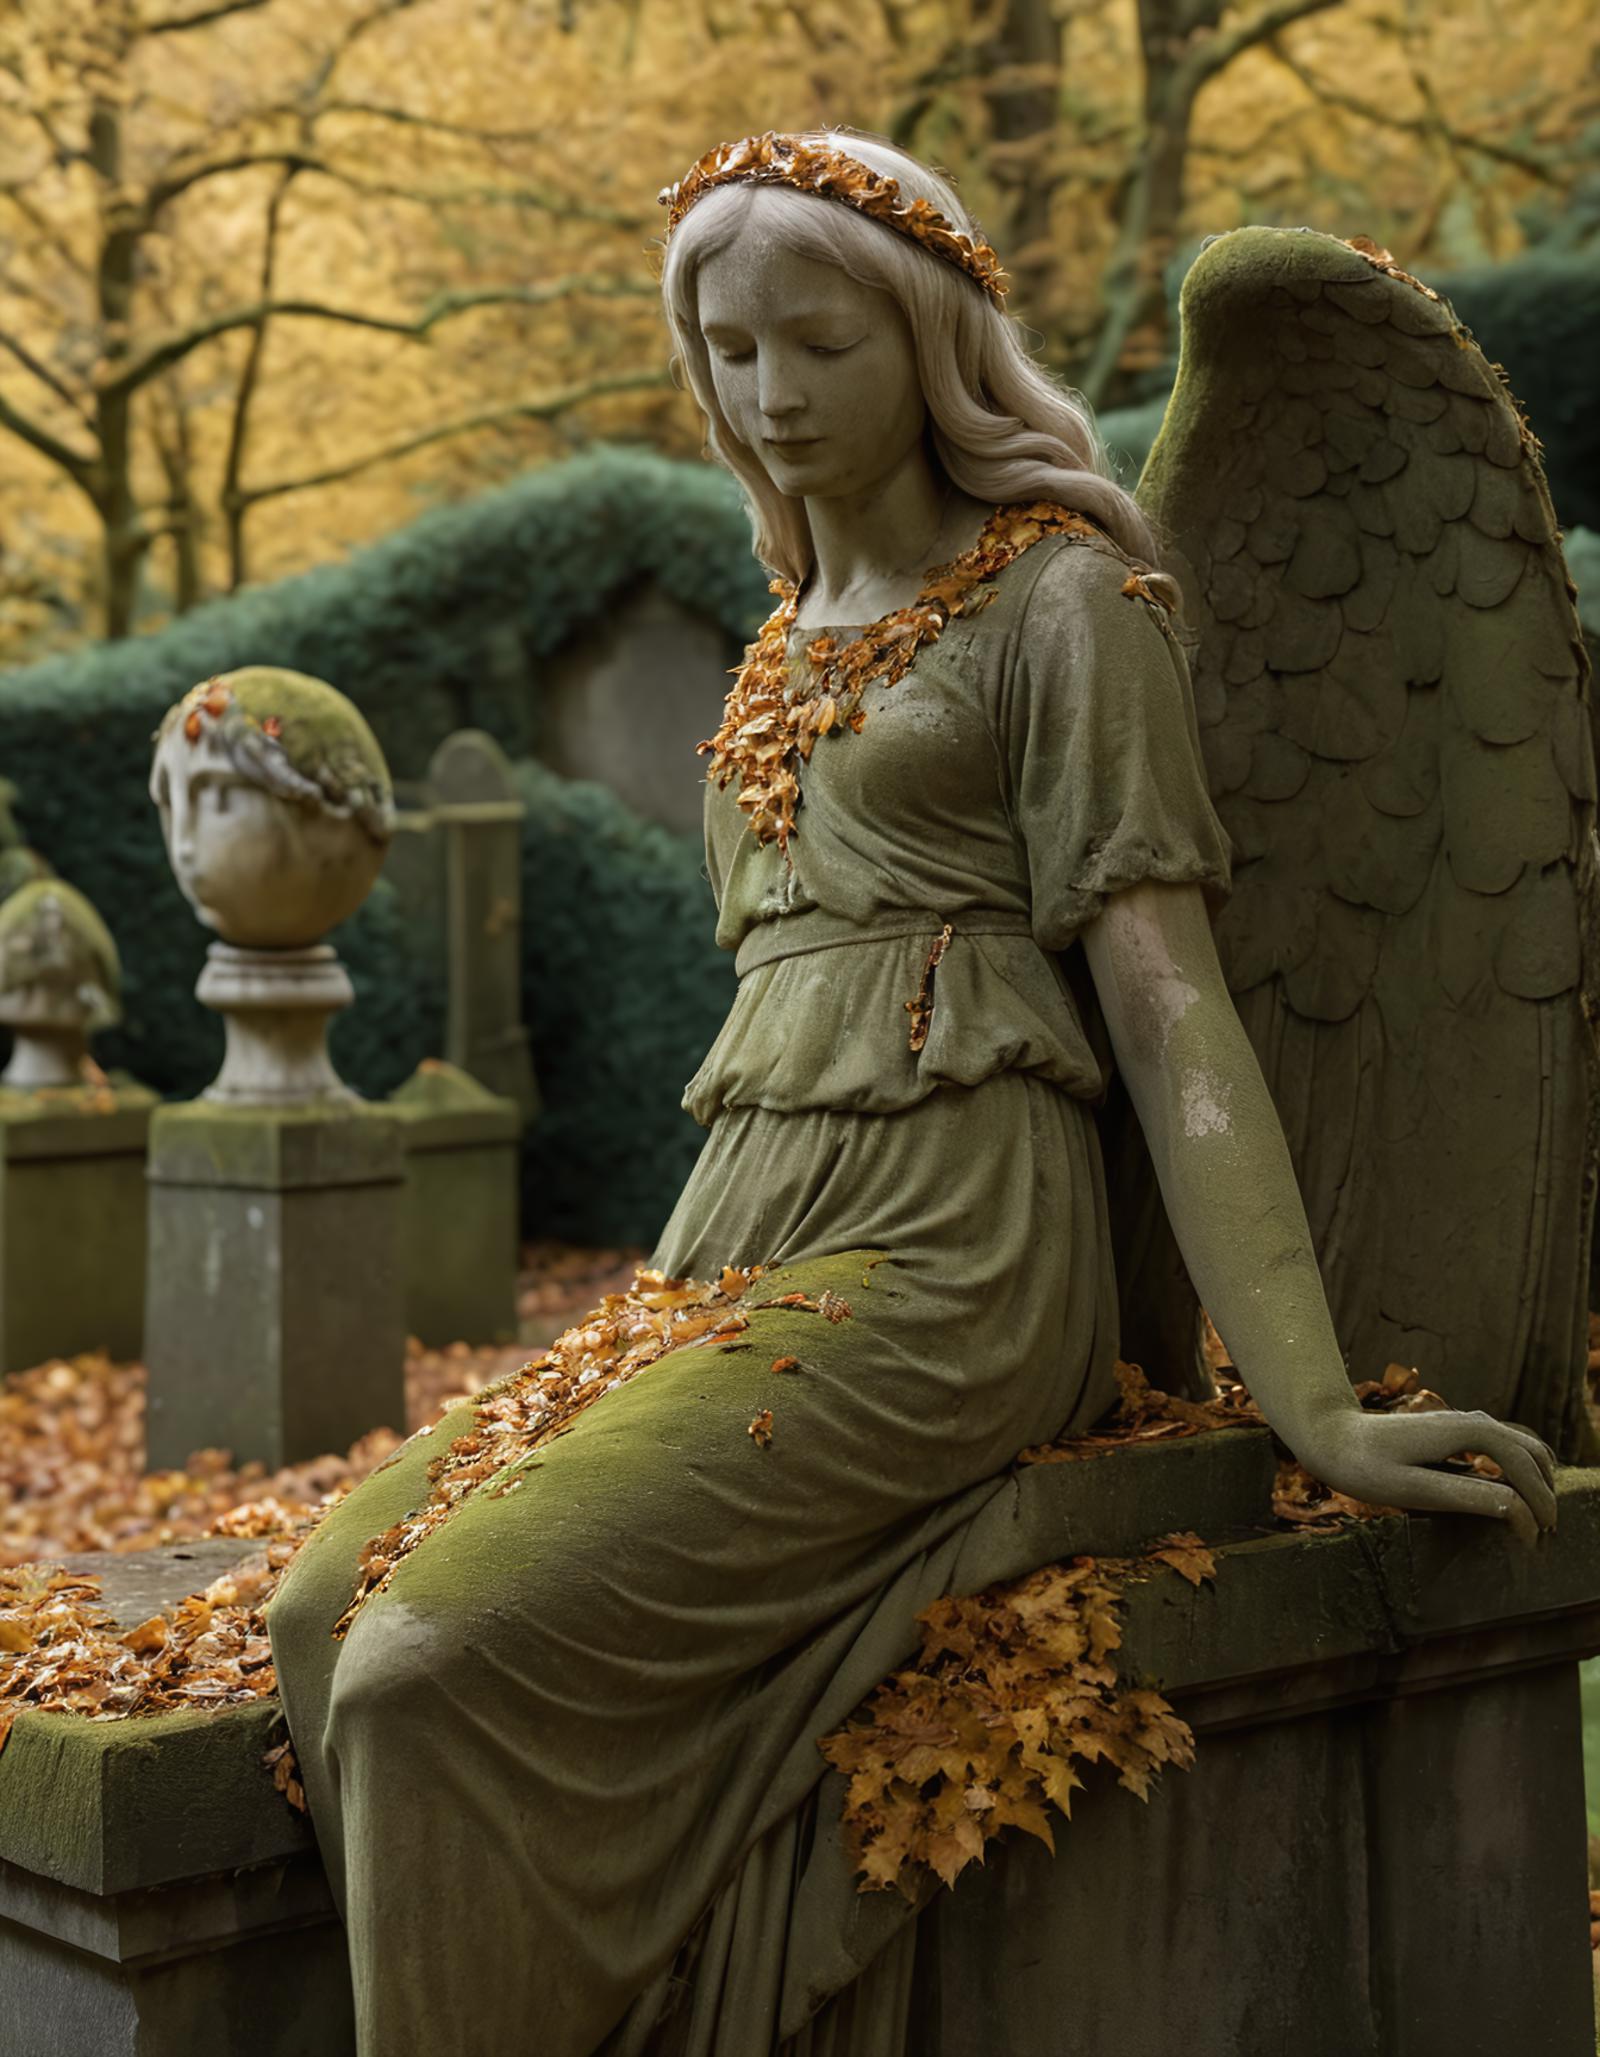 Tales from the Graveyard (german Grave art) image by Standspurfahrer